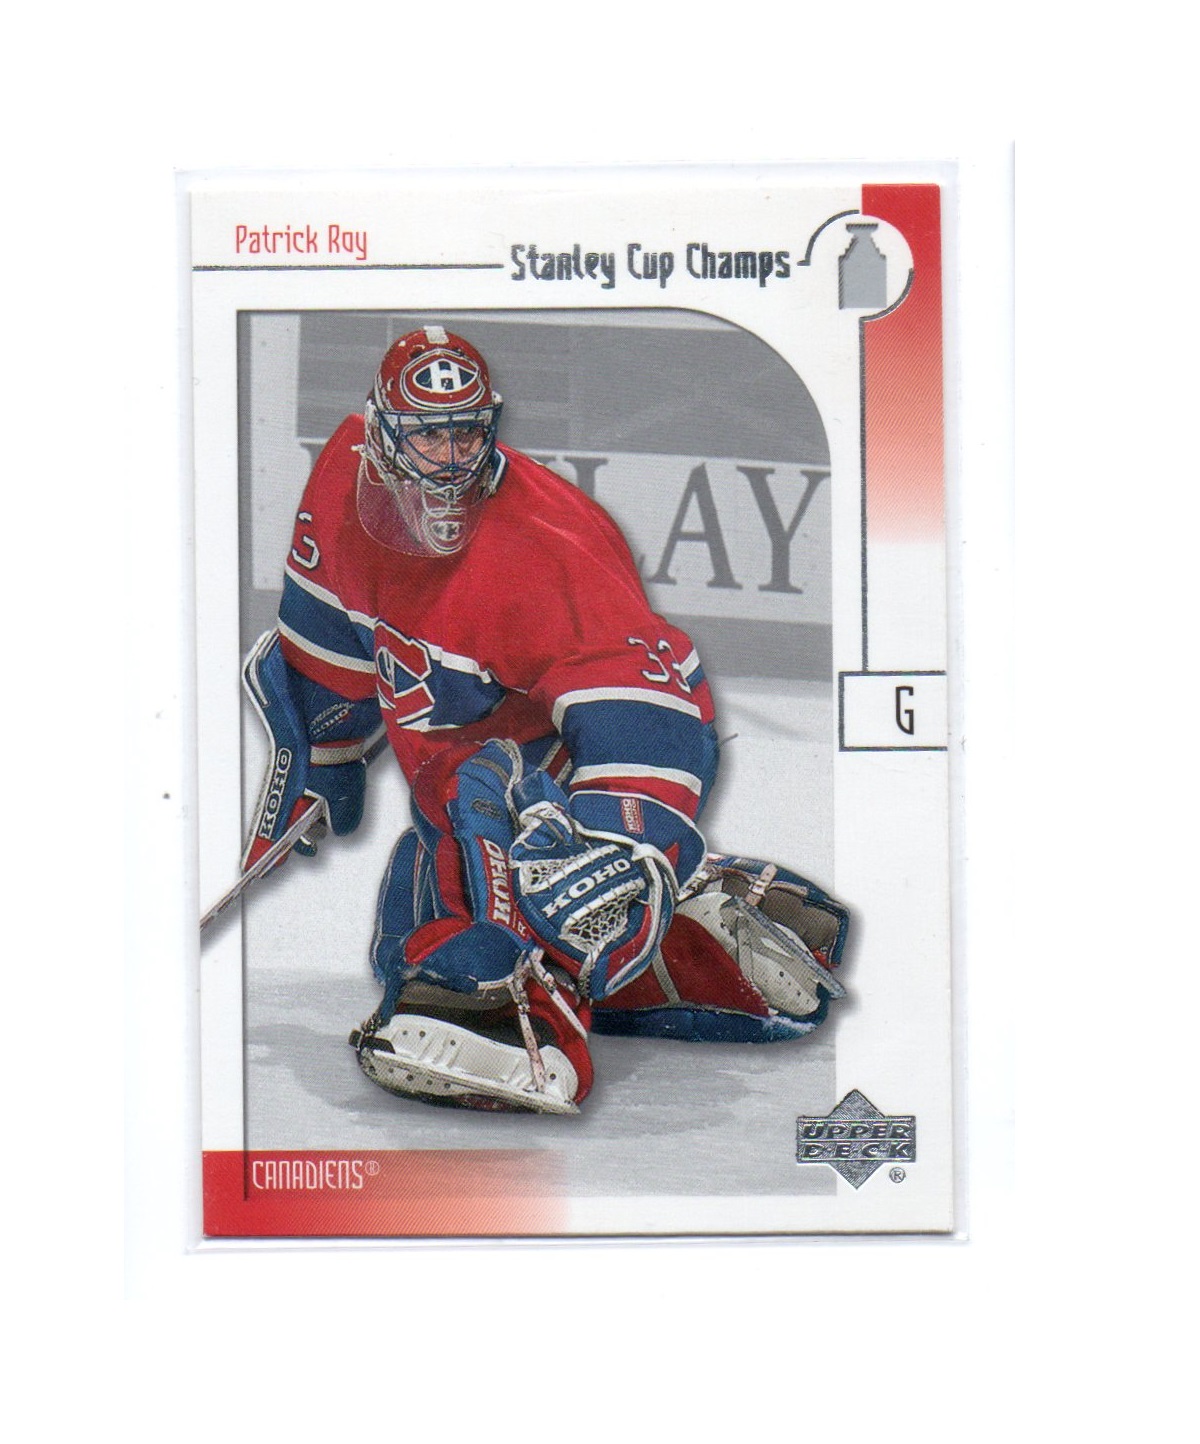 2001-02 UD Stanley Cup Champs #67 Patrick Roy (40-X286-CANADIENS)